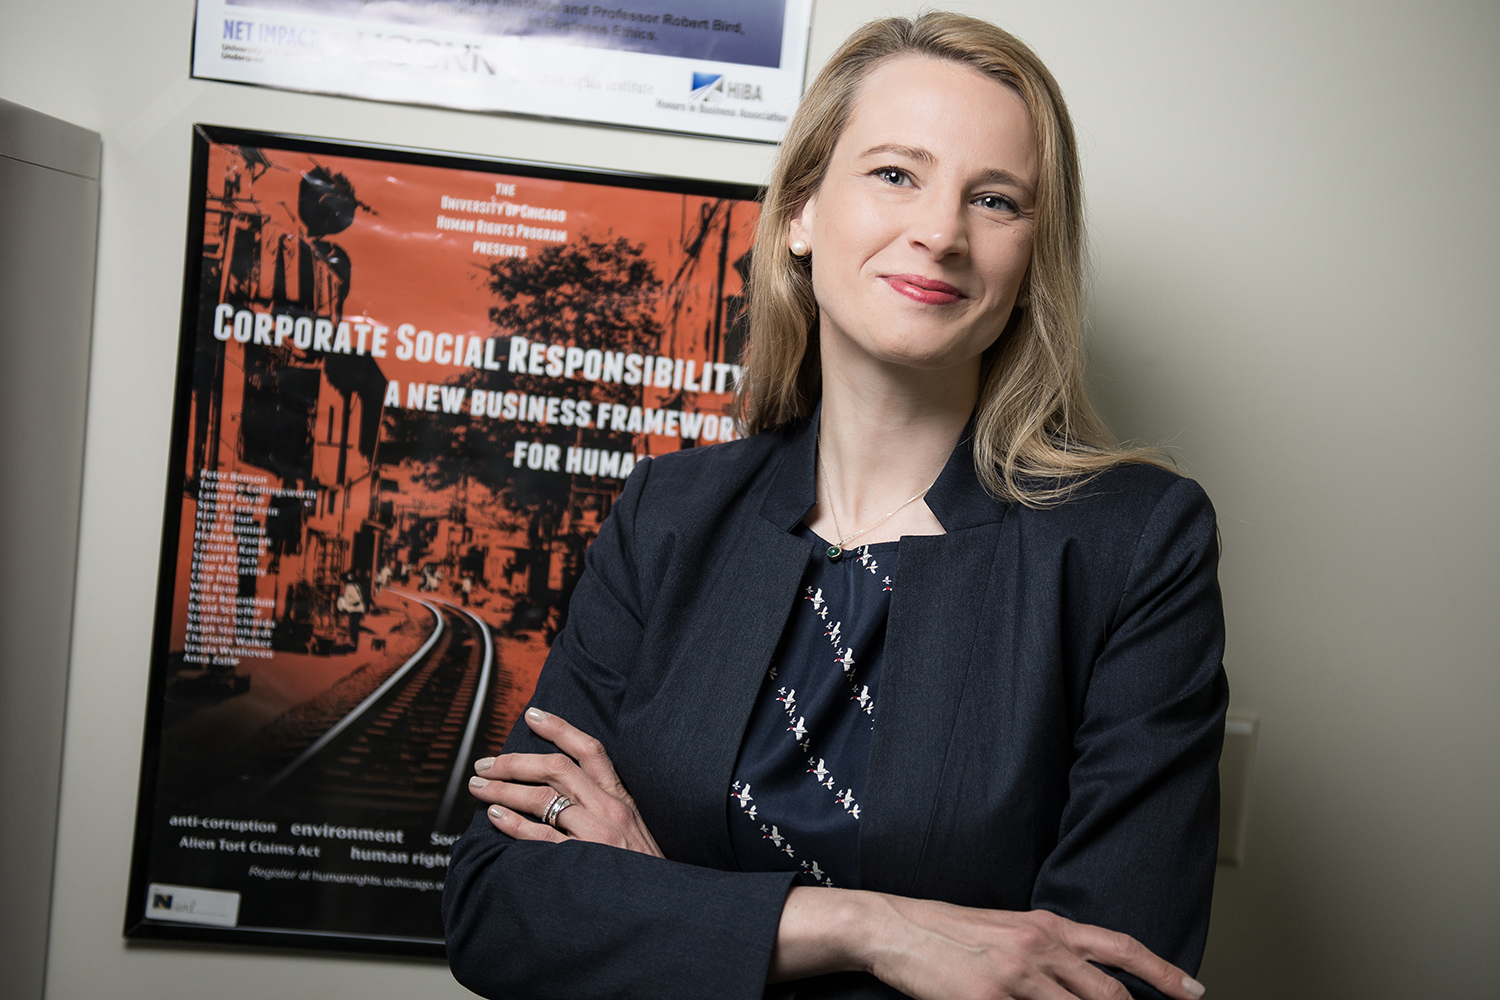 Caroline Kaeb is an Assistant Professor of Business Law and Human Rights at the UConn School of Business, where she holds a joint appointment with the Human Rights Institute and a courtesy appointment with the School of Law. (Nathan Oldham/UConn photo)